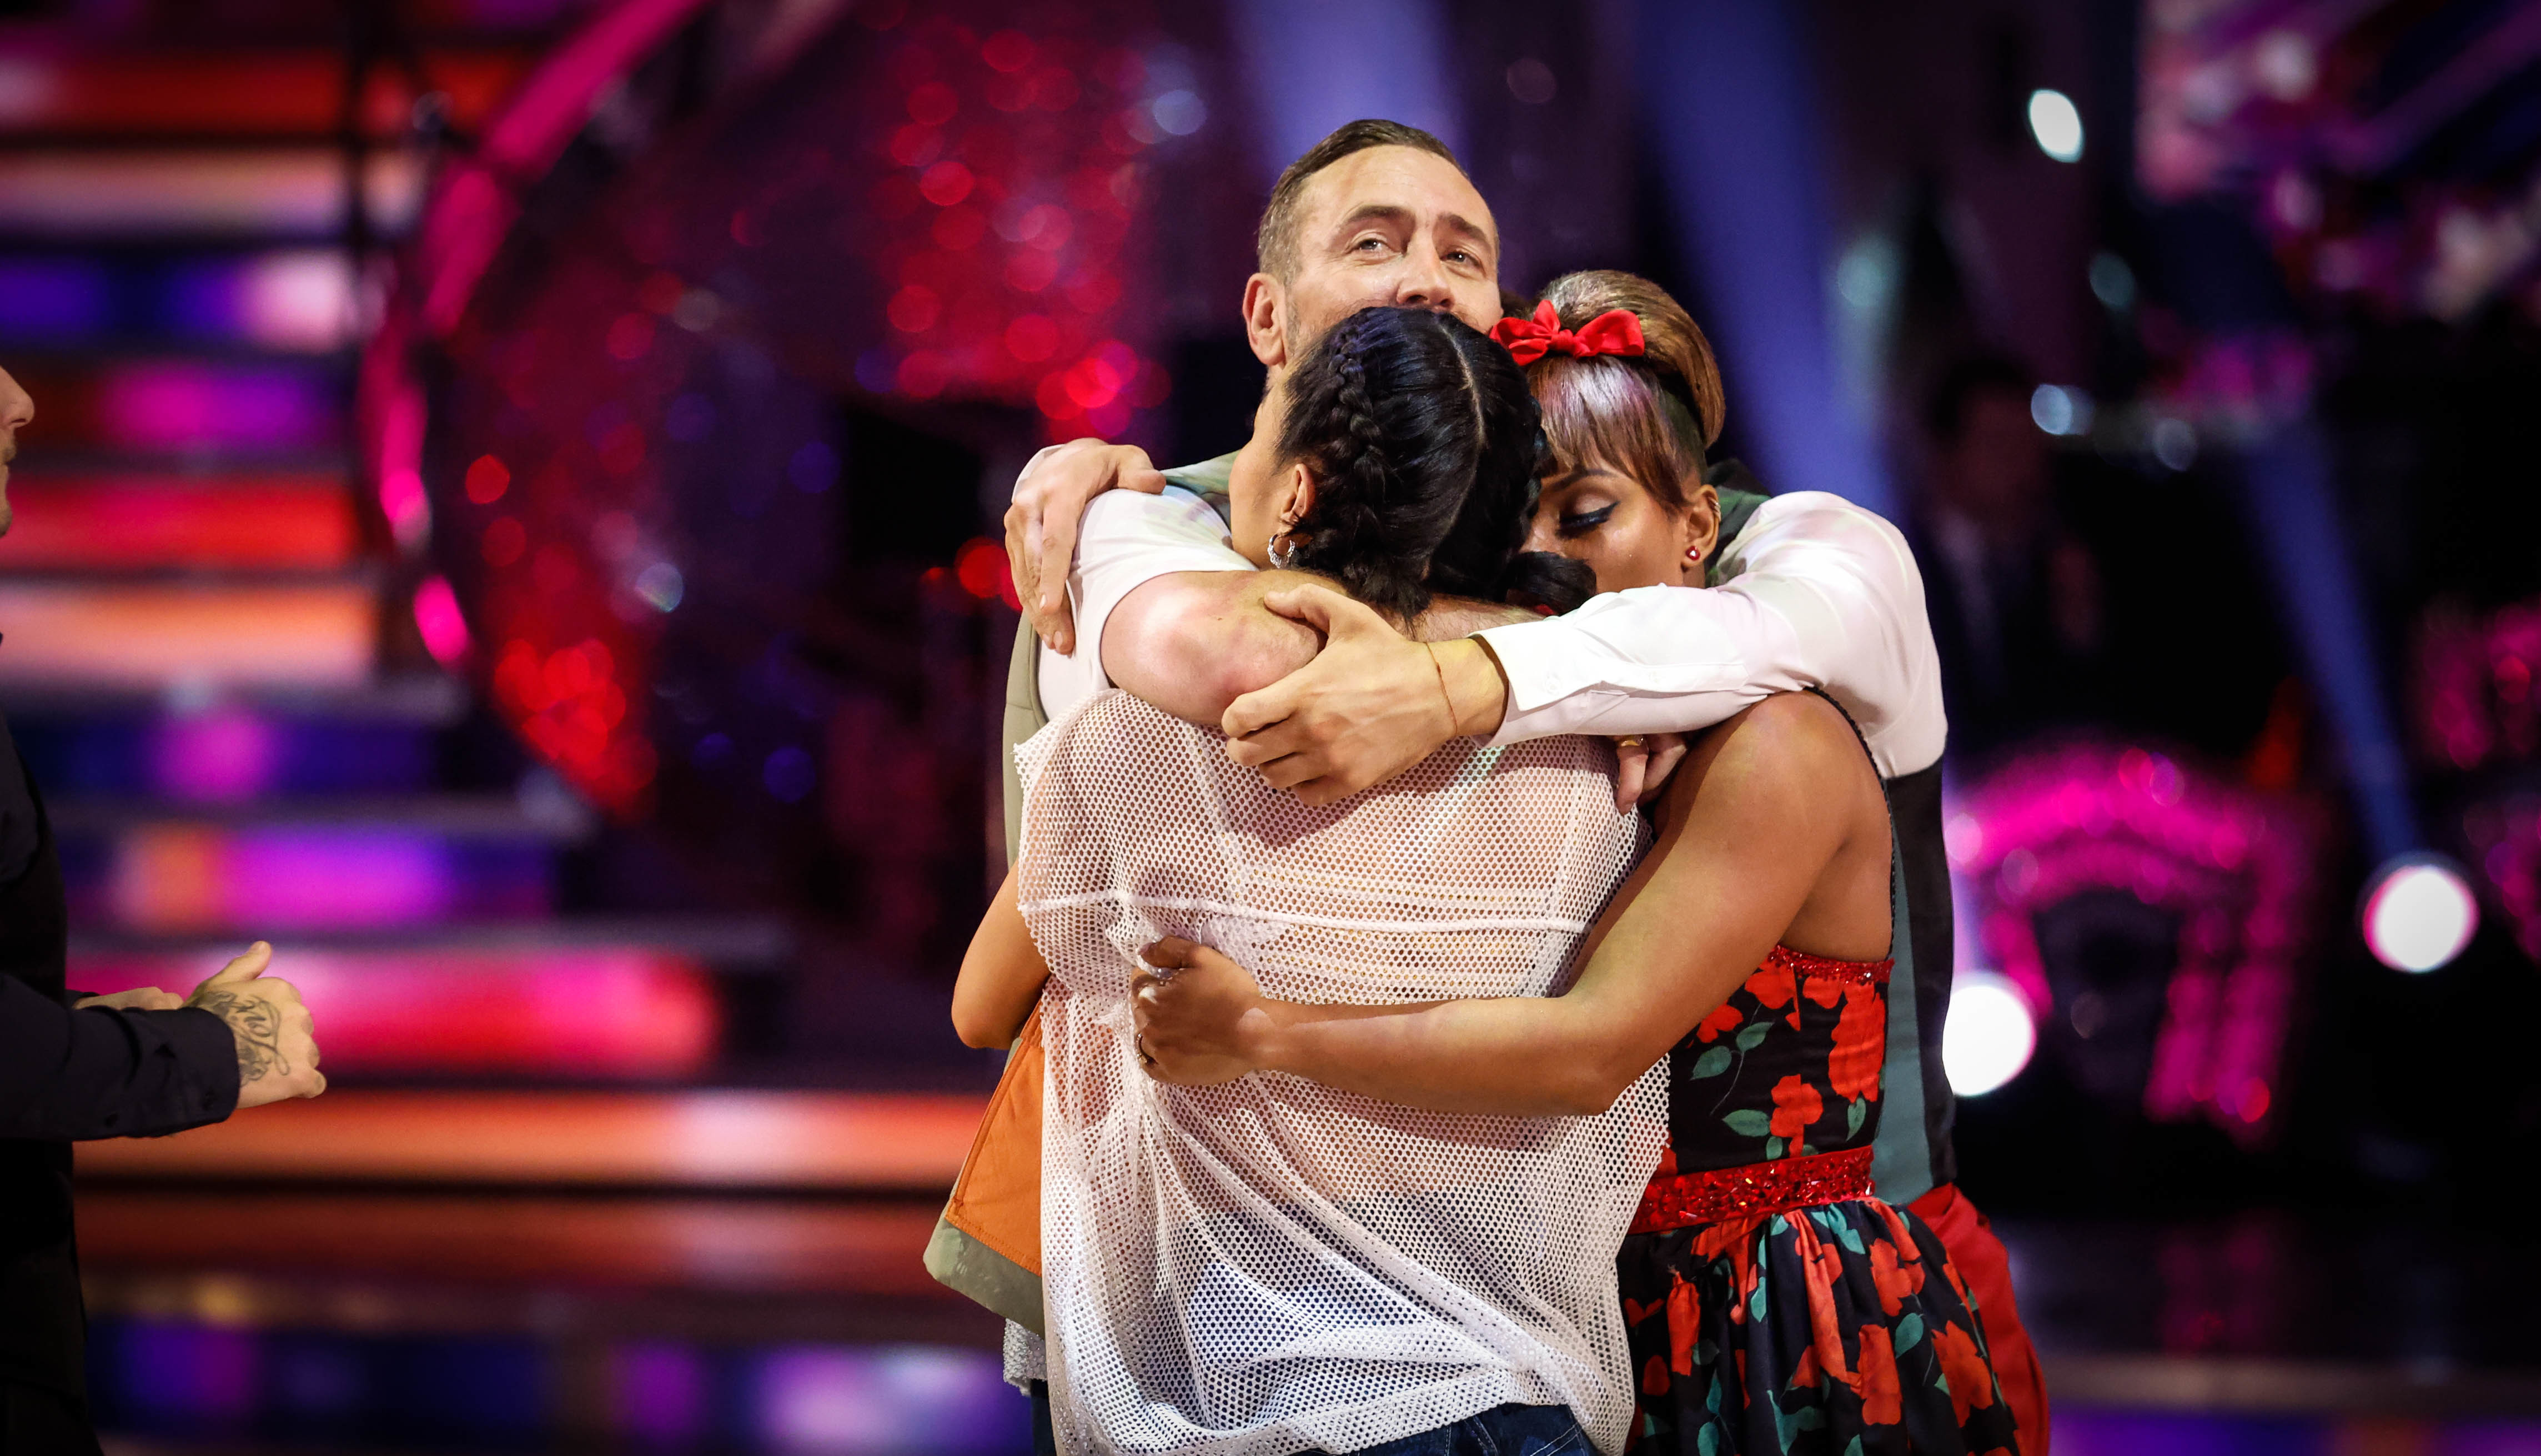 Strictly Come Dancing 2022,12-12-2022,TX12 RESULTS SHOW,TX12,Will Mellor, Nancy Xu and Fleur East,++Results show - Embargoed for publication until 21:00 hours Monday December 12th 2022++,BBC,Guy Levy